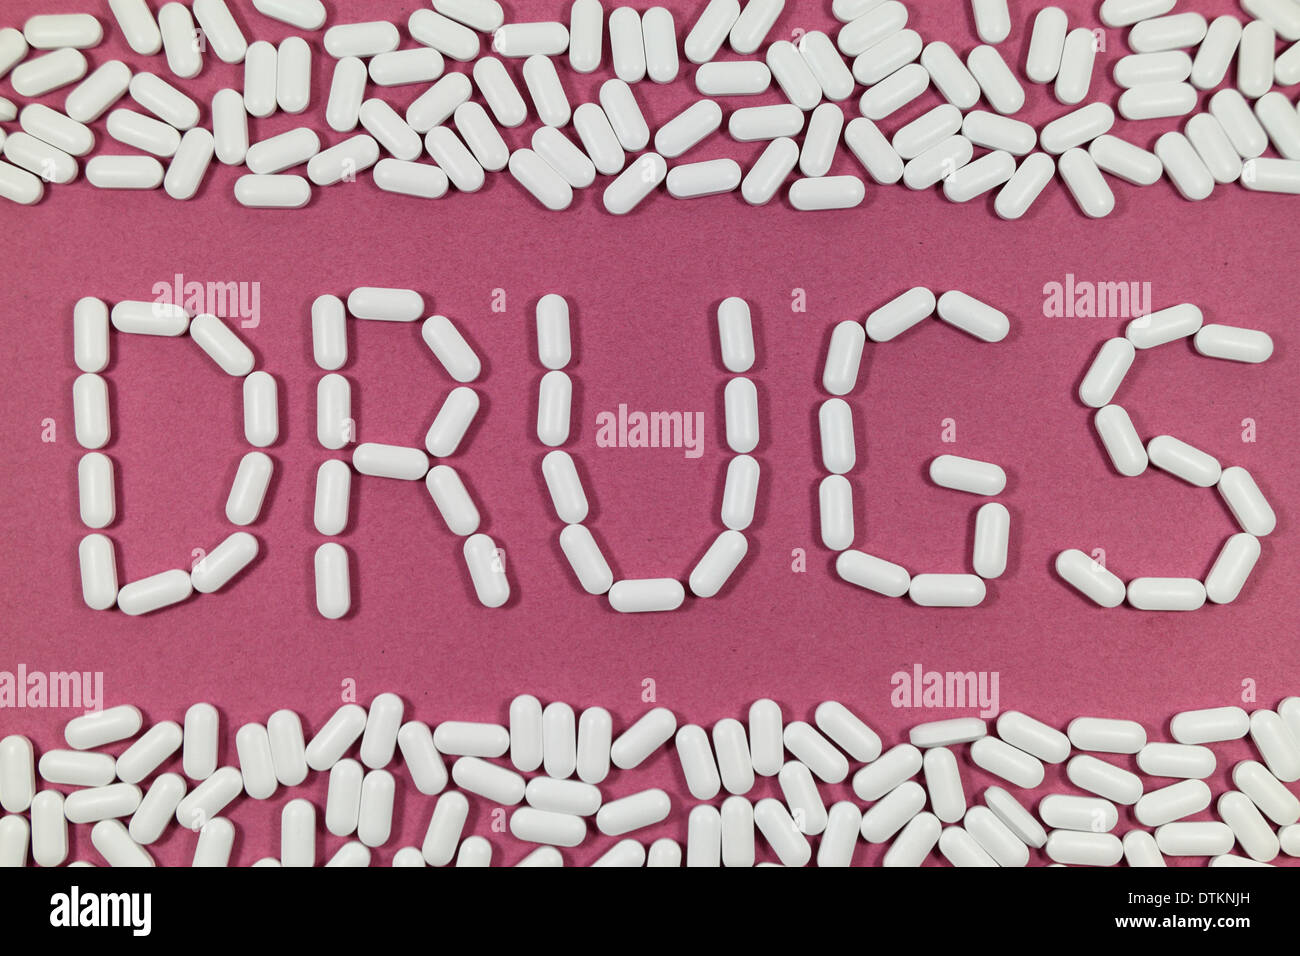 White pills on a red/pinks background spelling 'DRUGS'. Stock Photo